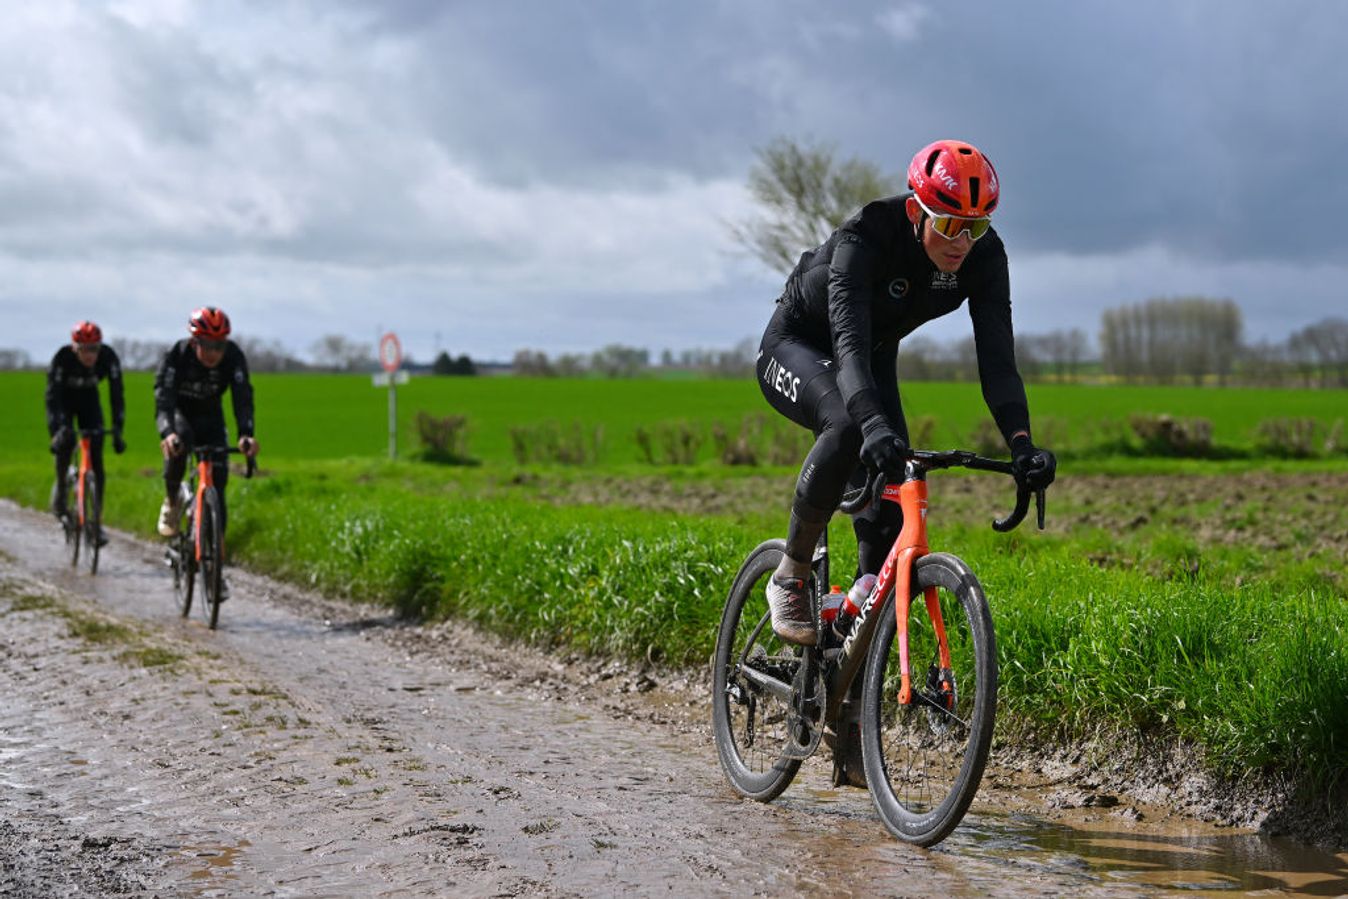 Josh Tarling will be hoping for a strong showing at his second Paris-Roubaix